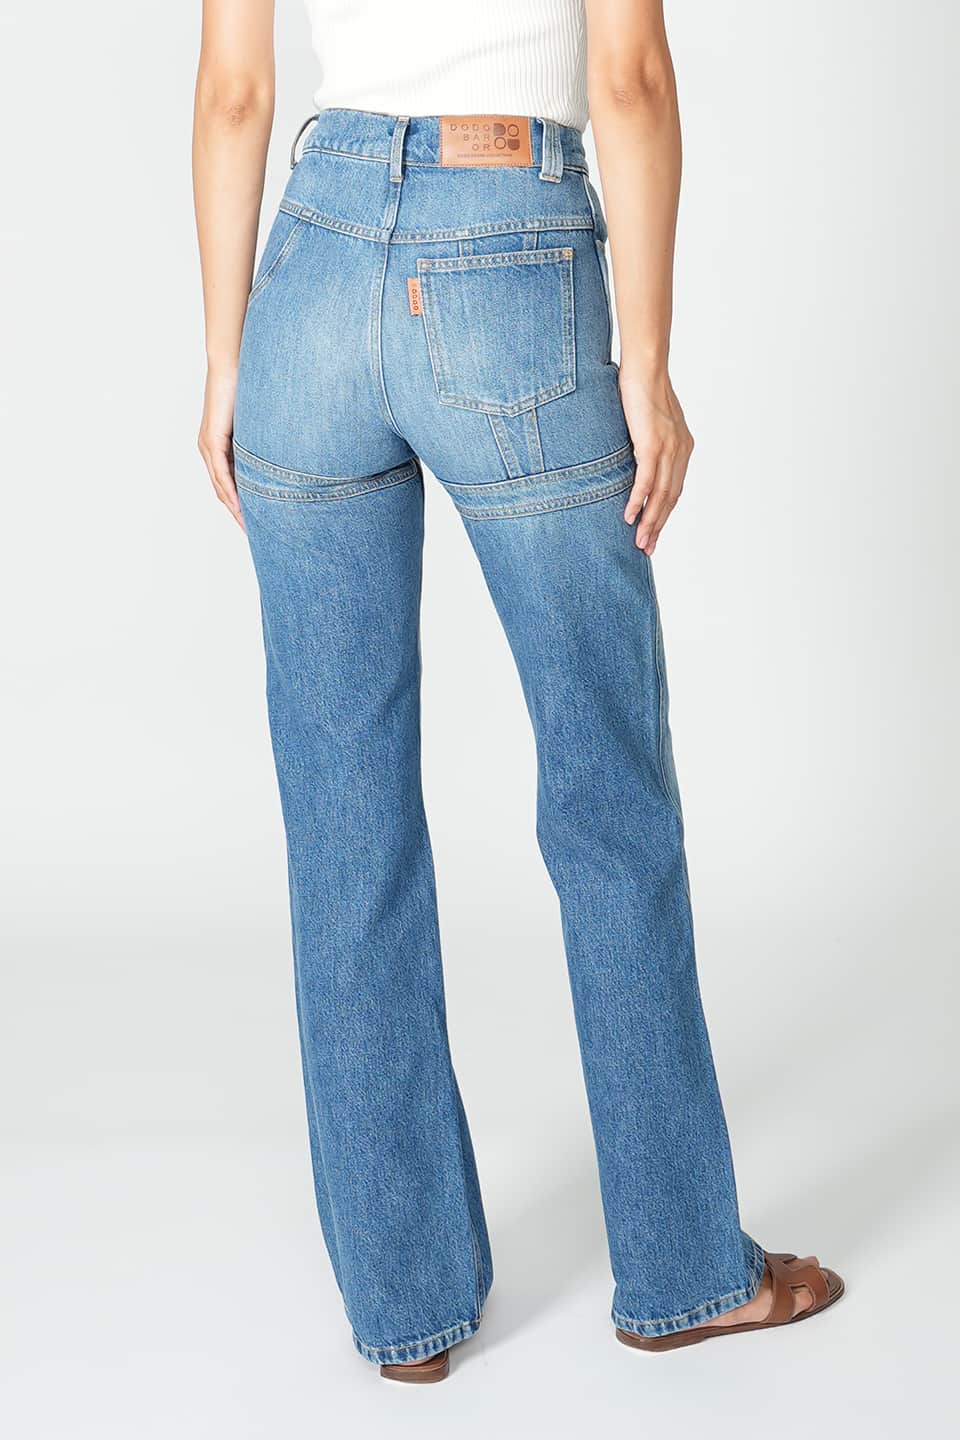 Designer Indigo Jeans, shop online with free delivery in UAE. Product gallery 5